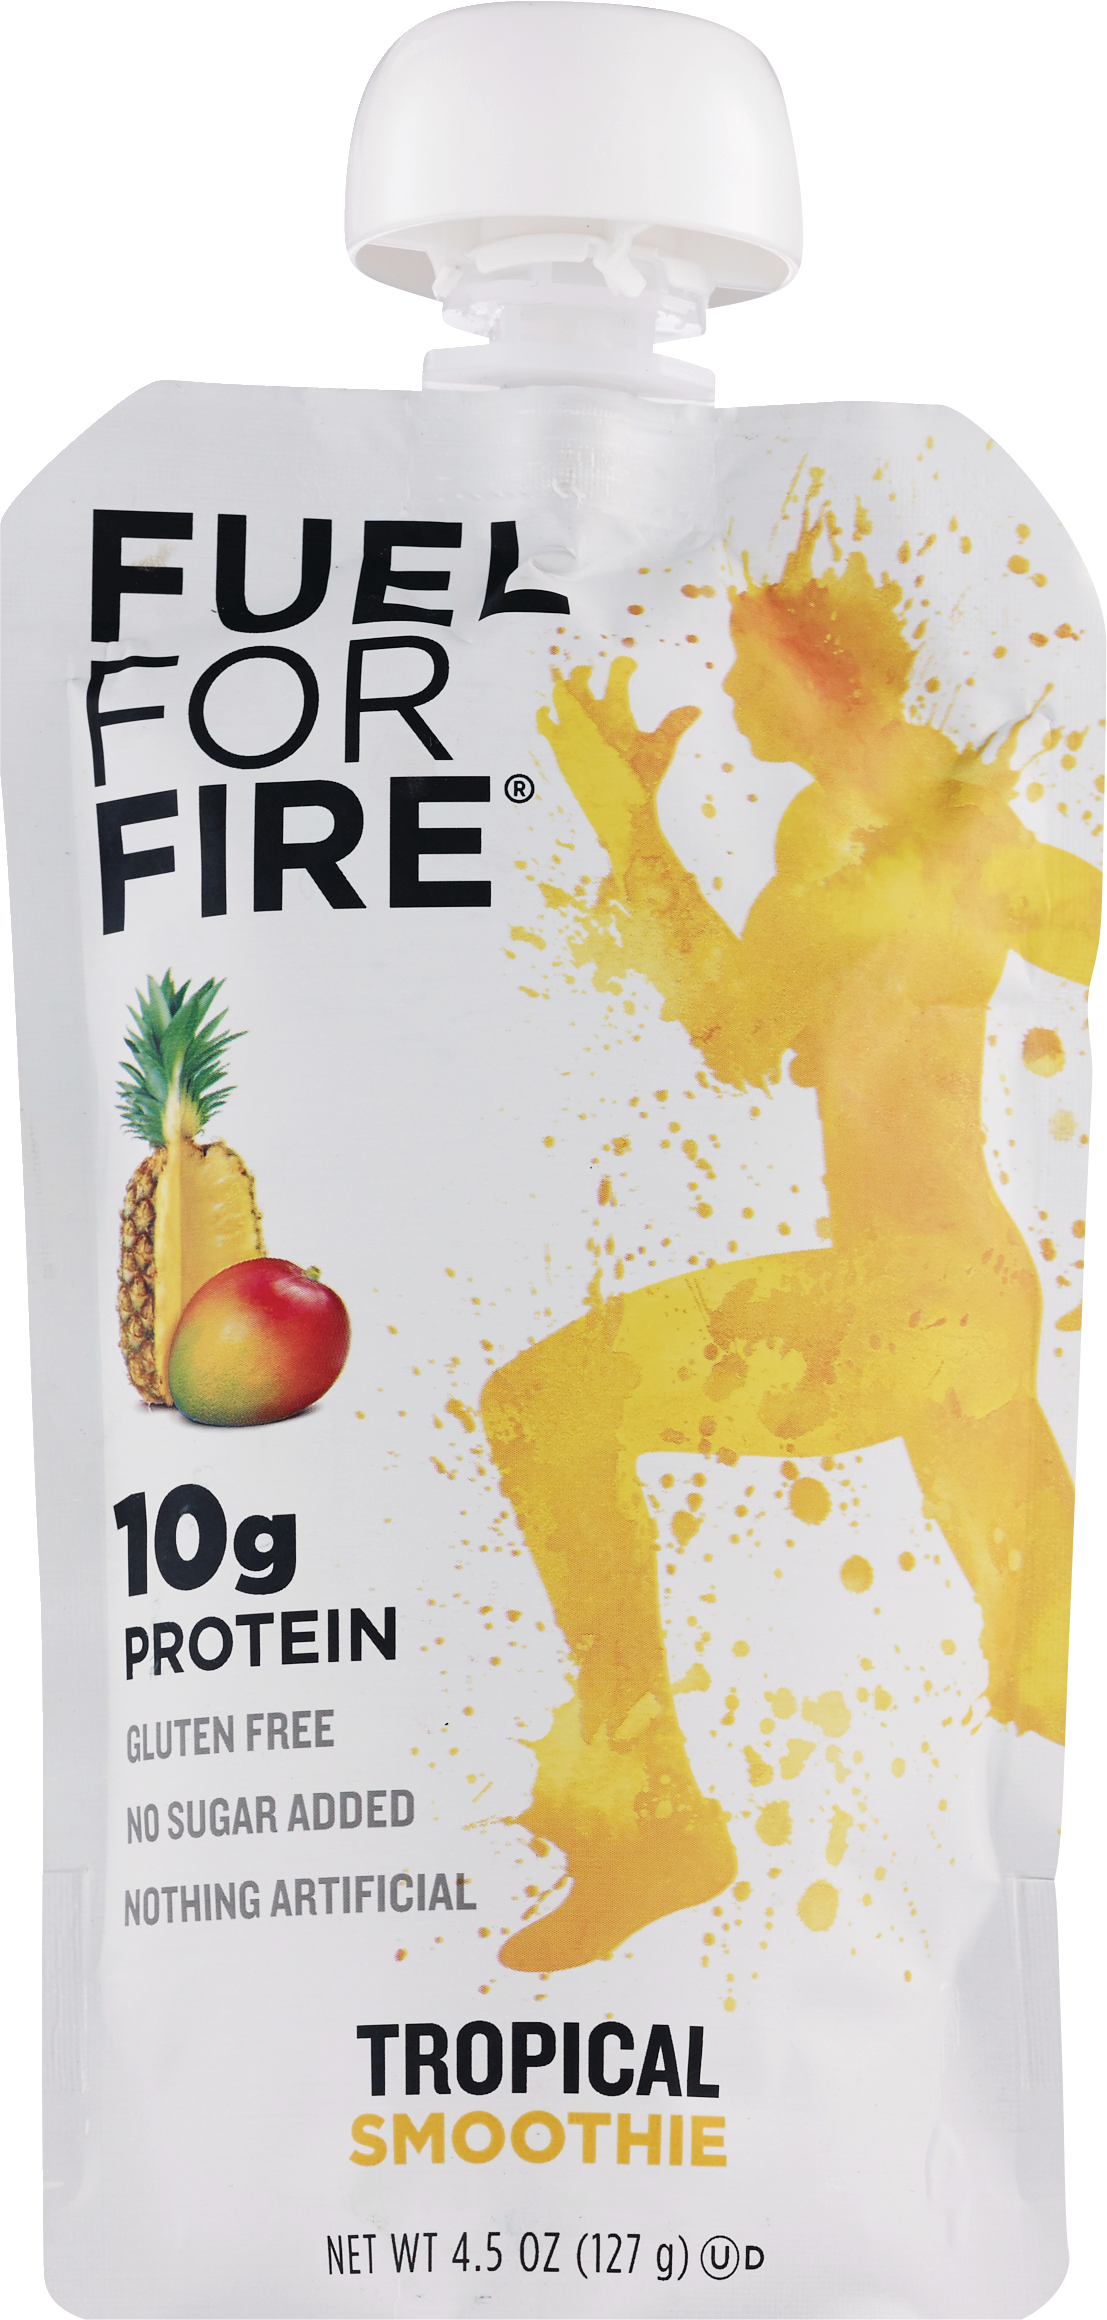 Fuel For Fire Protein Drink, 4.5 OZ